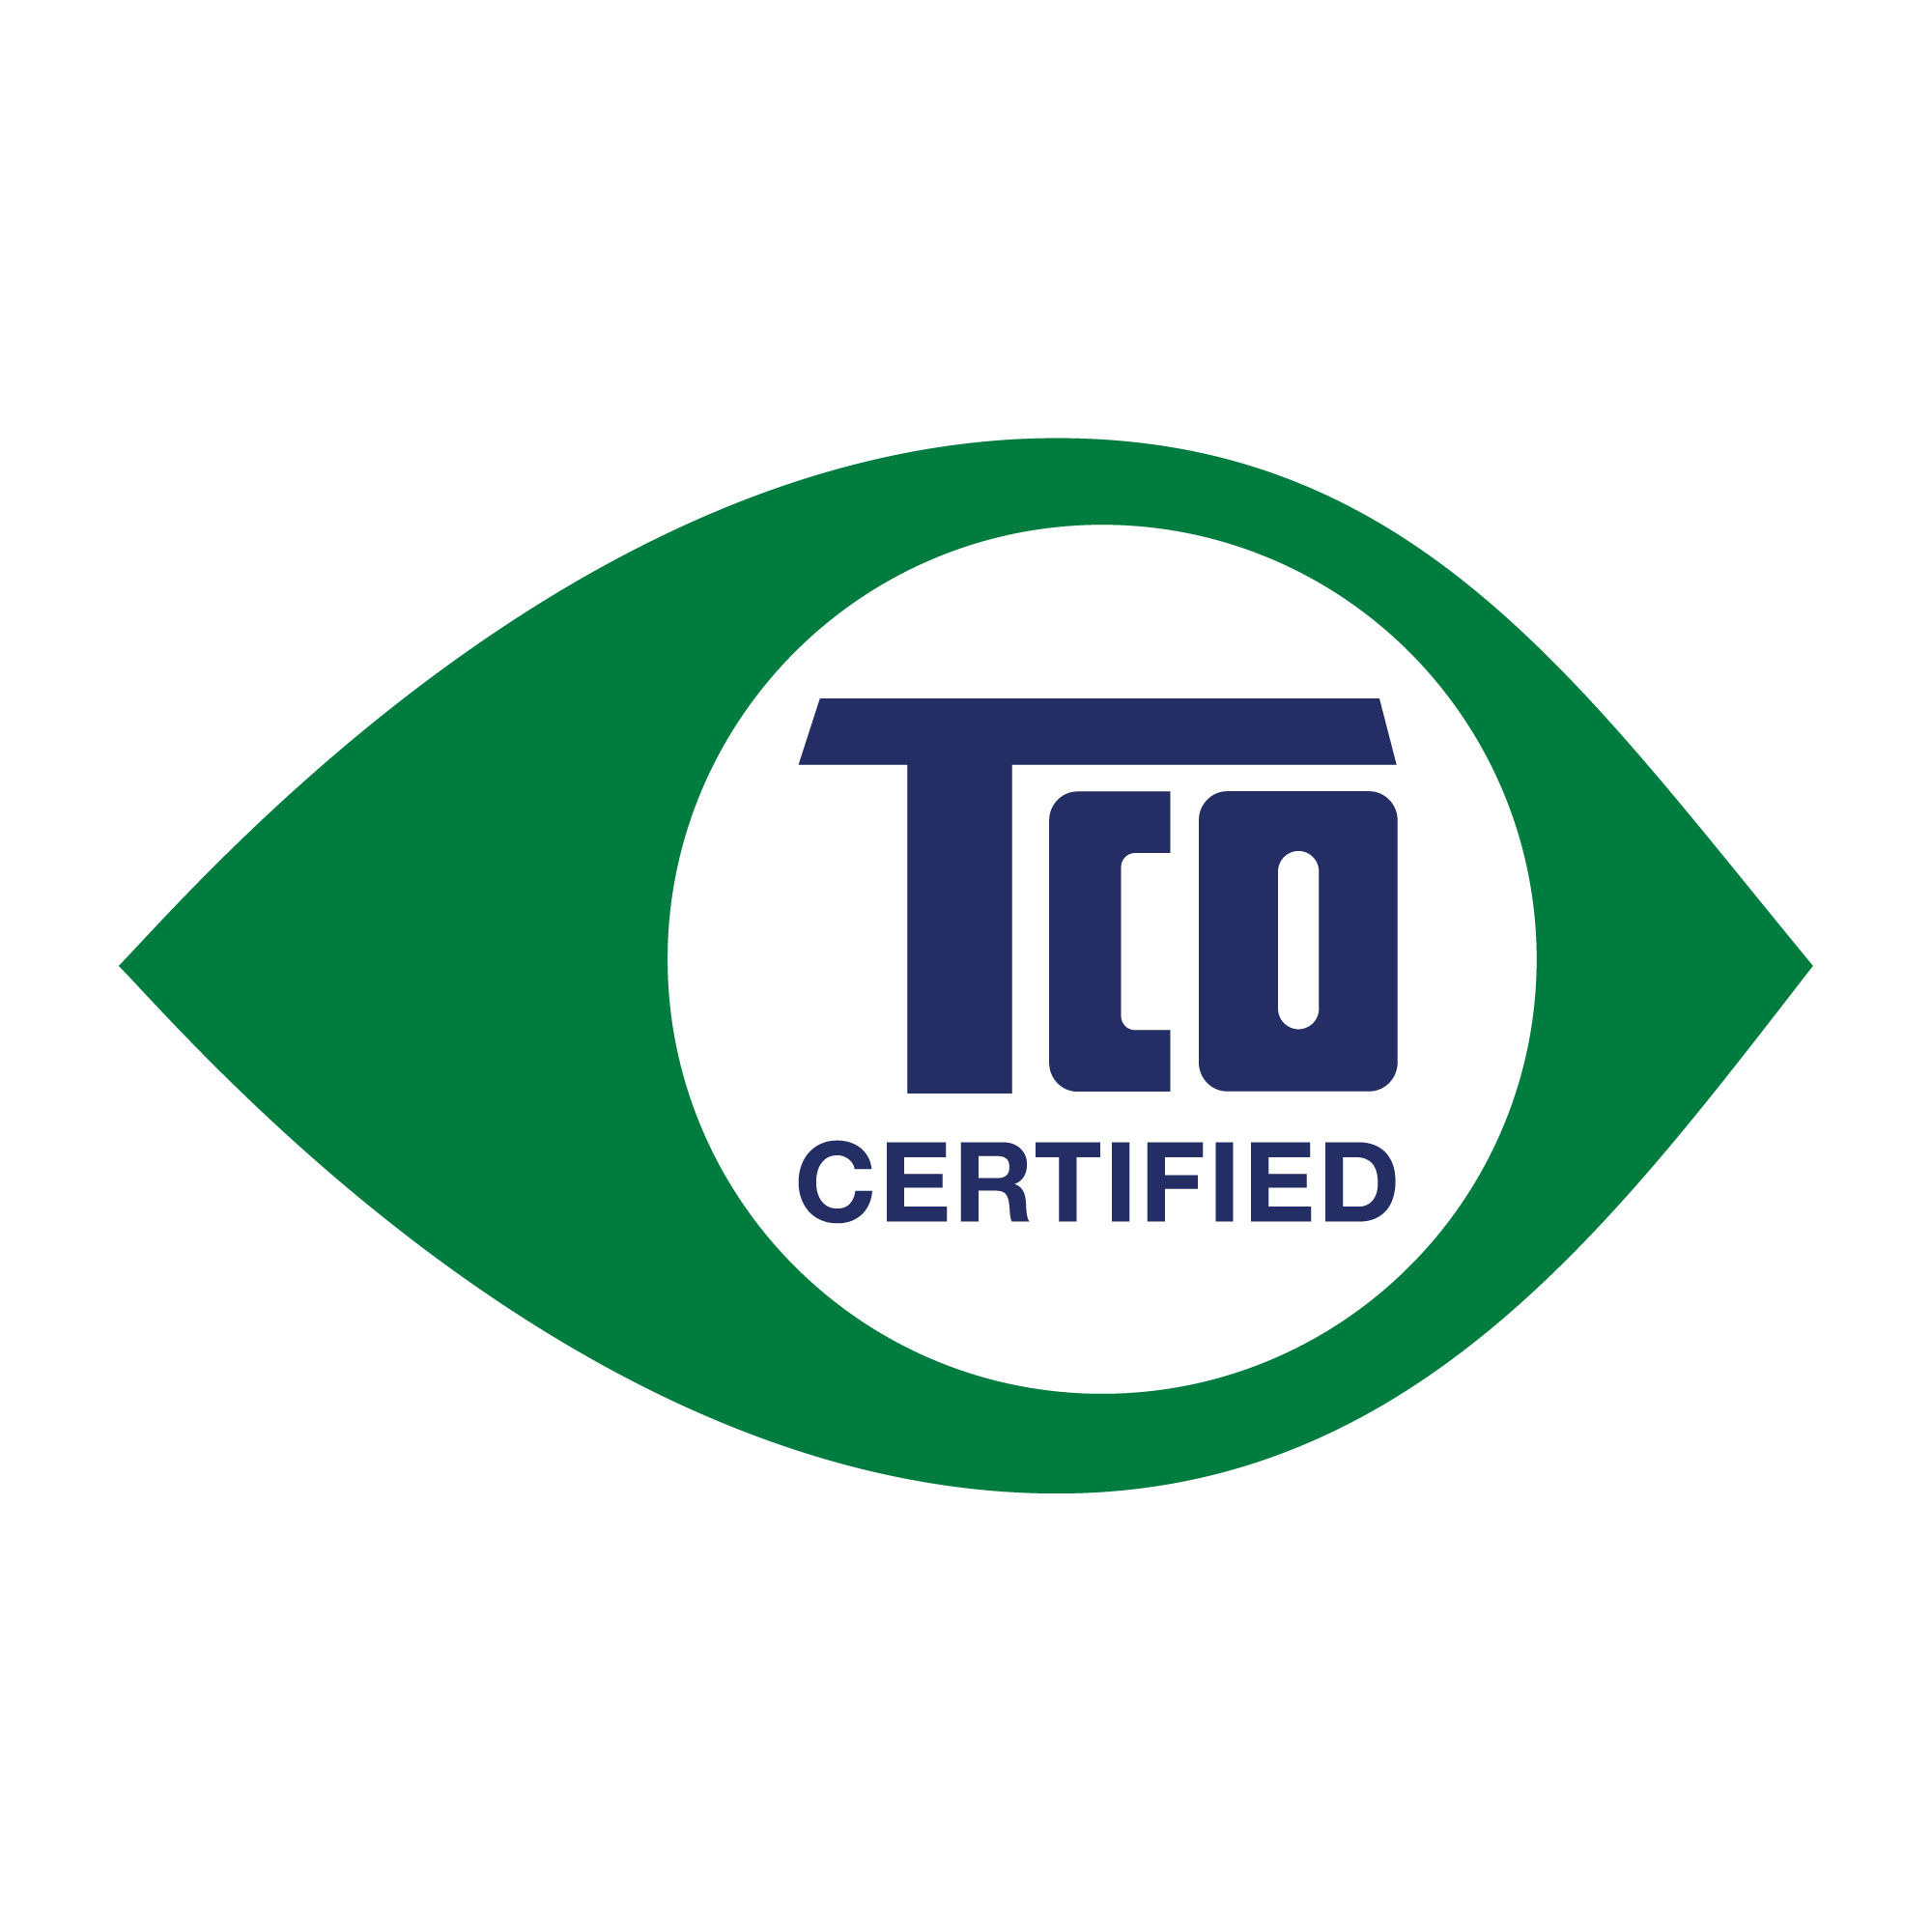 TCO CERTIFIED